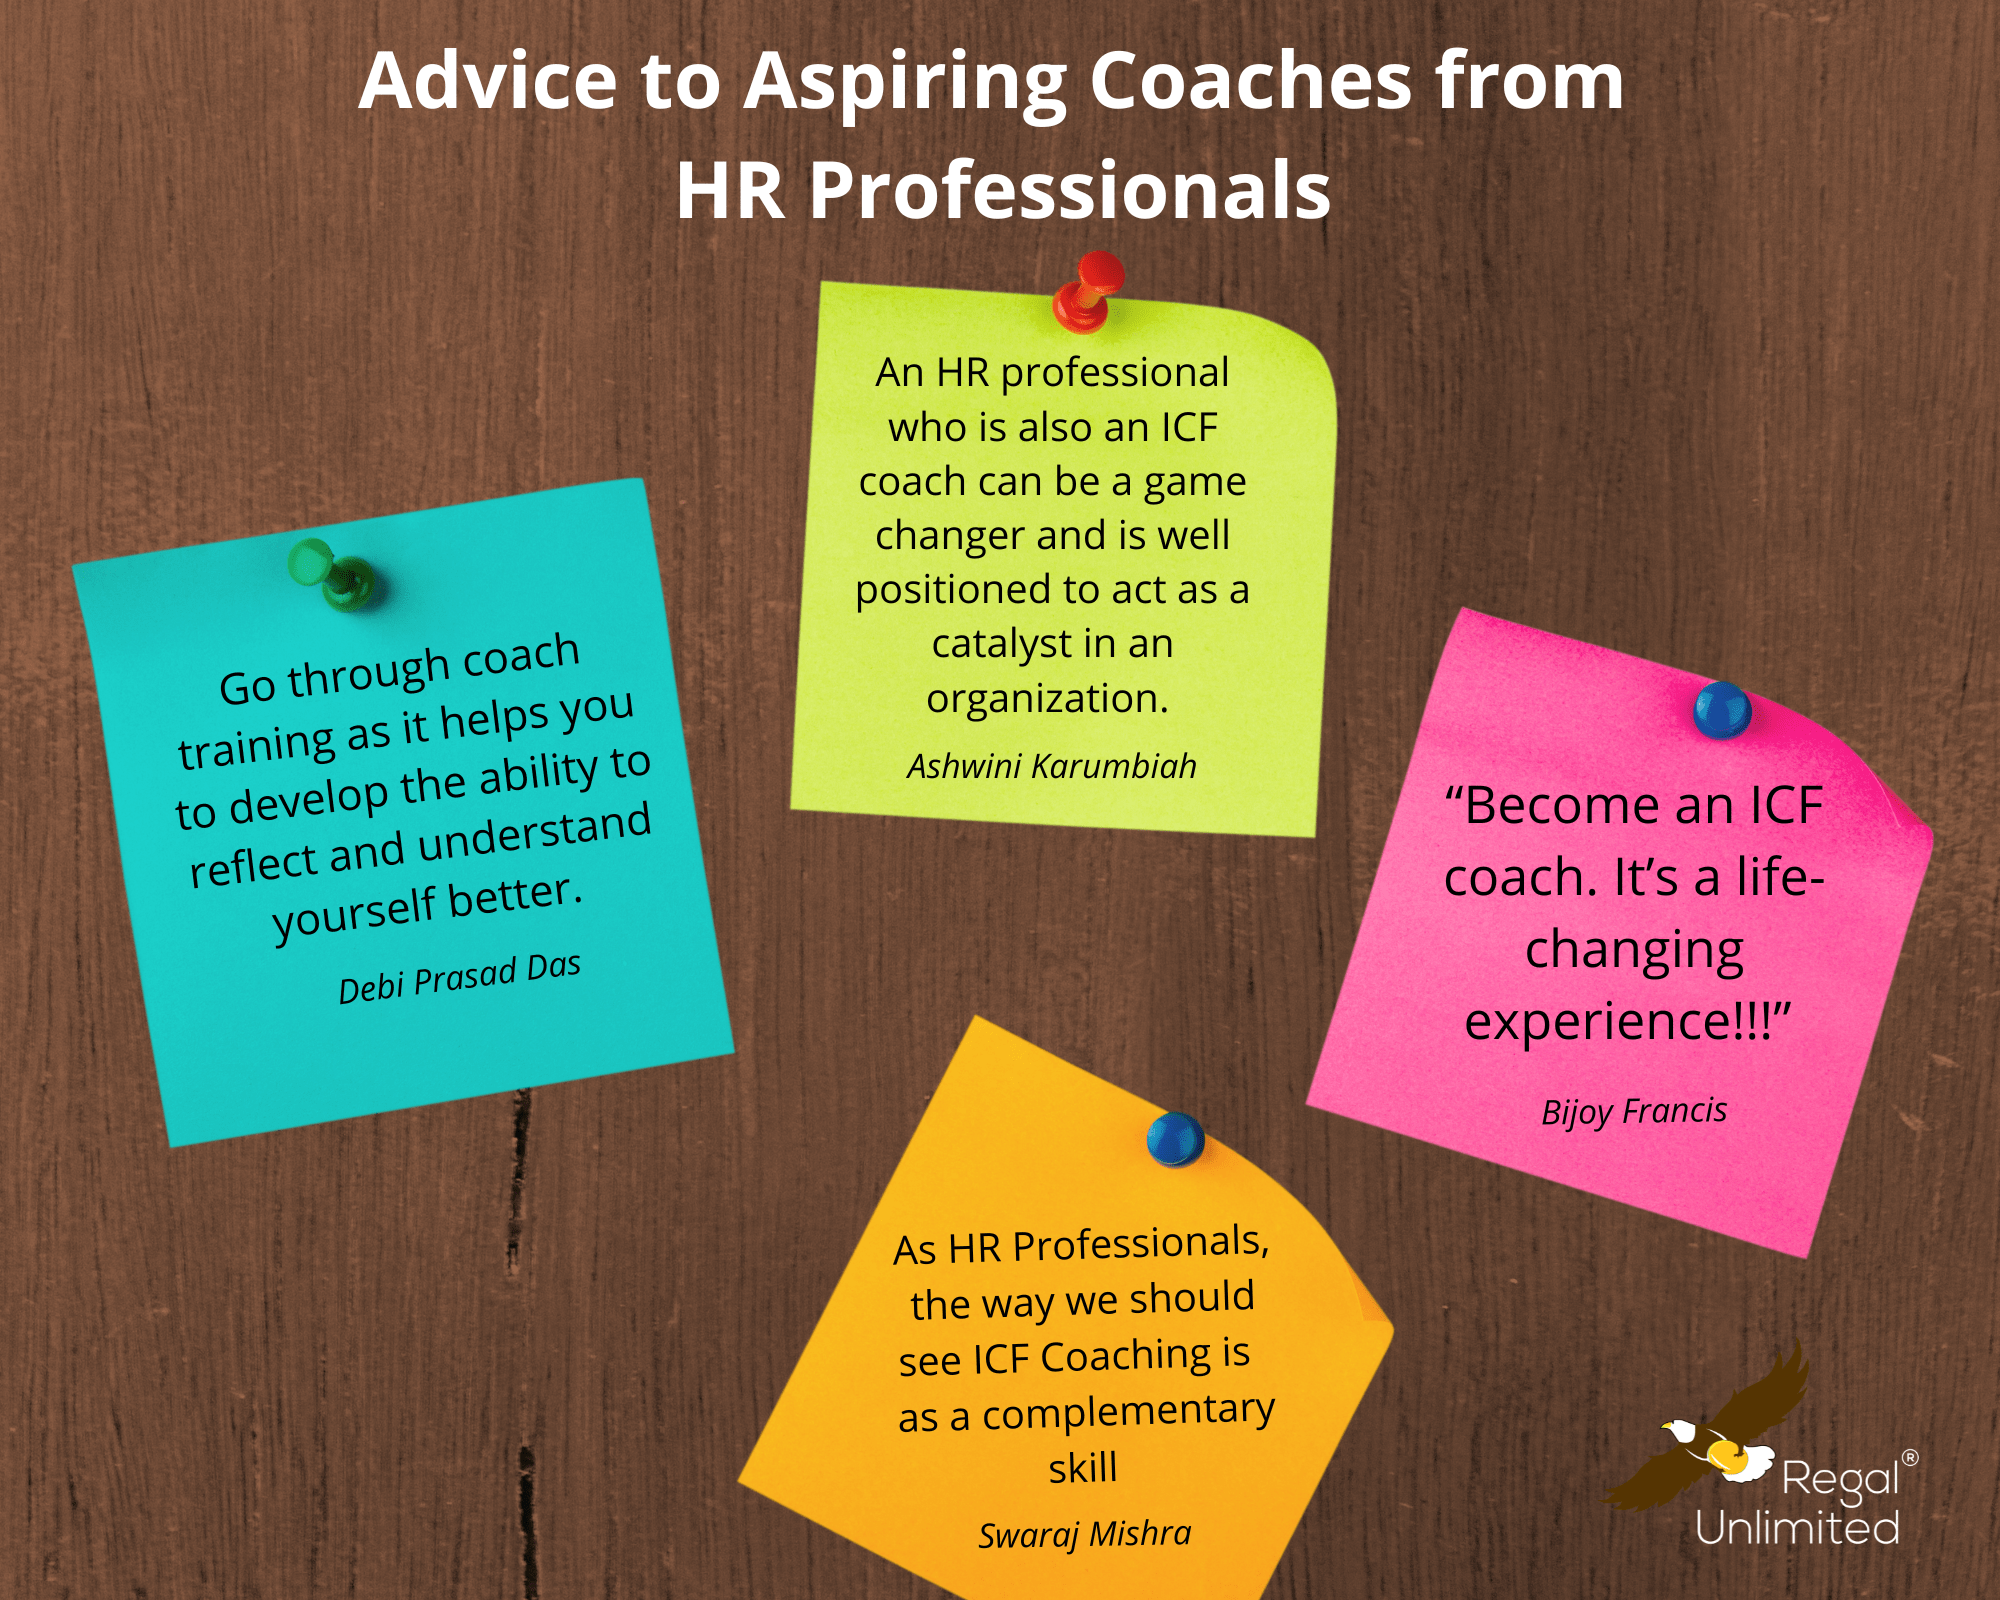 Advice to aspiring coaches from HR Professionals